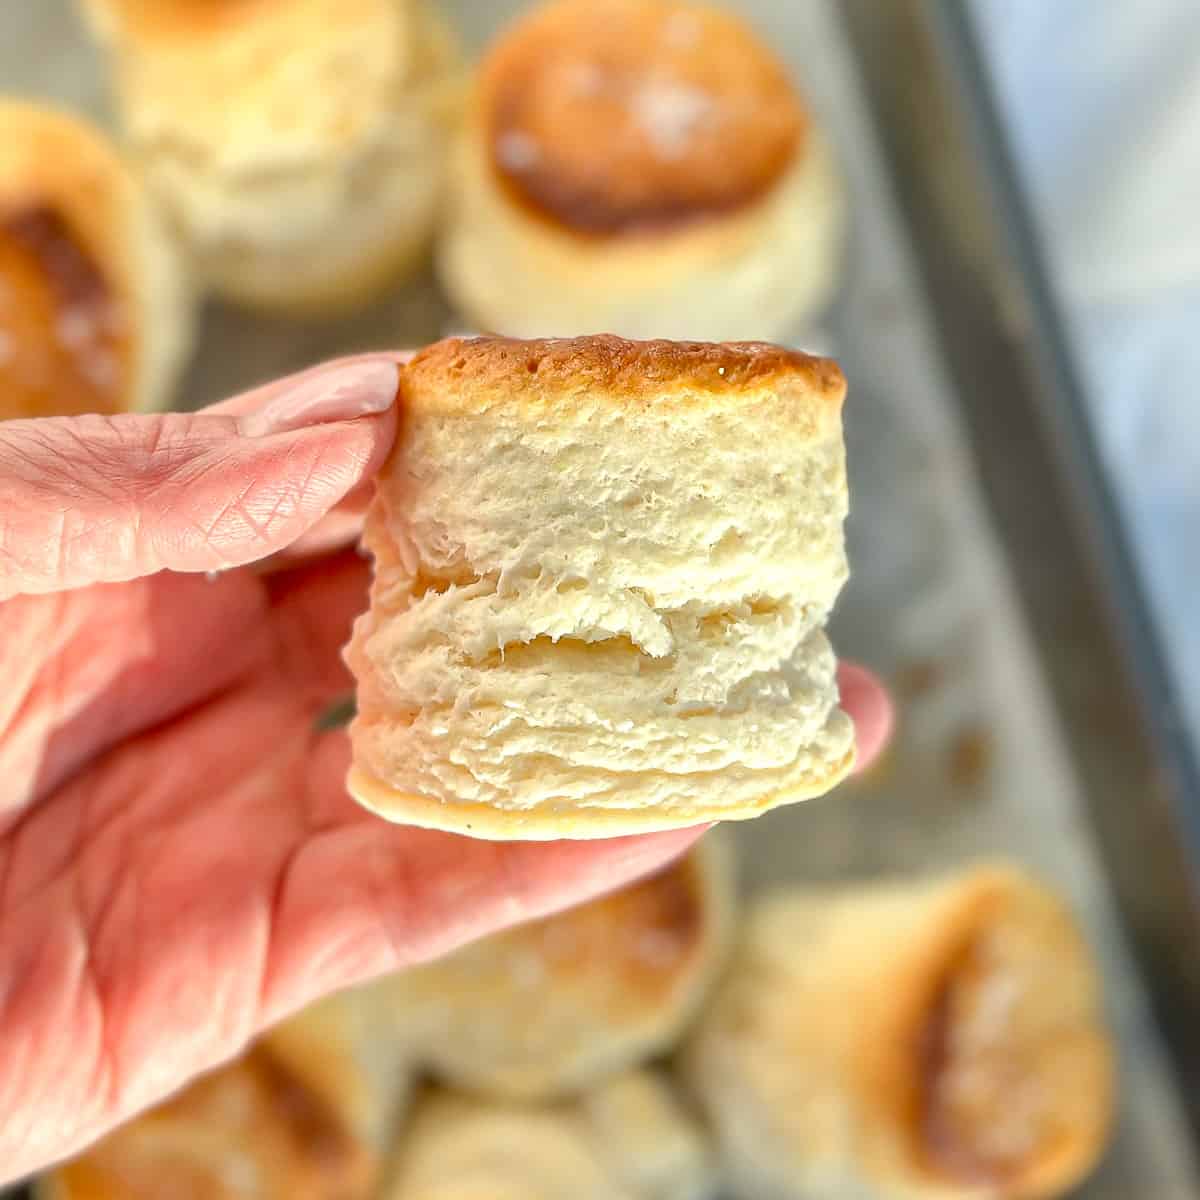 Close-up of a flaky and fluffy two ingredient biscuit being held in a hand.